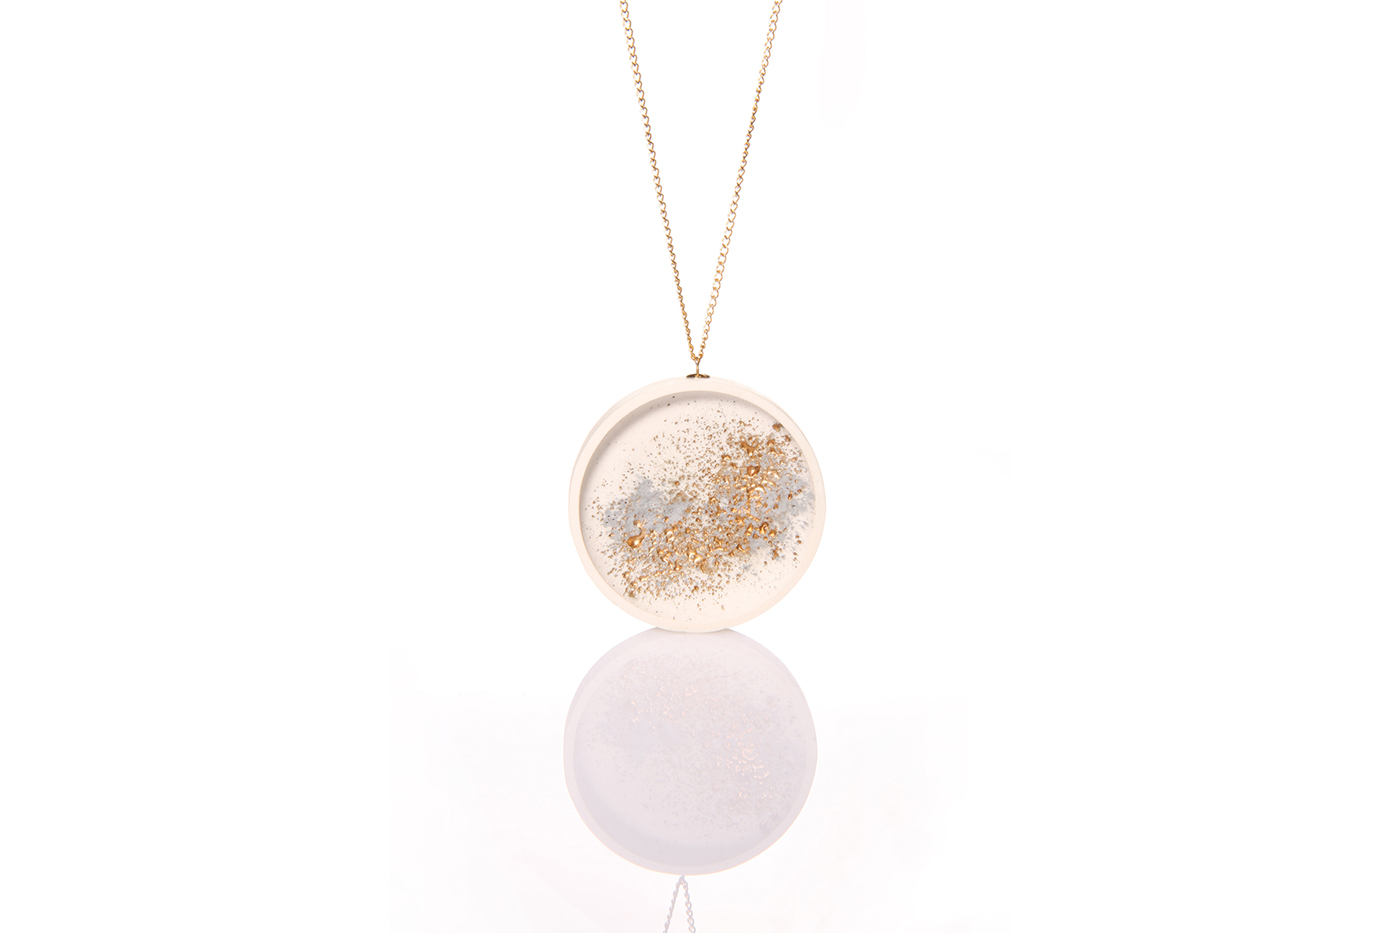 lunar Necklace photograph gold moon light stone night Accessory jewelry